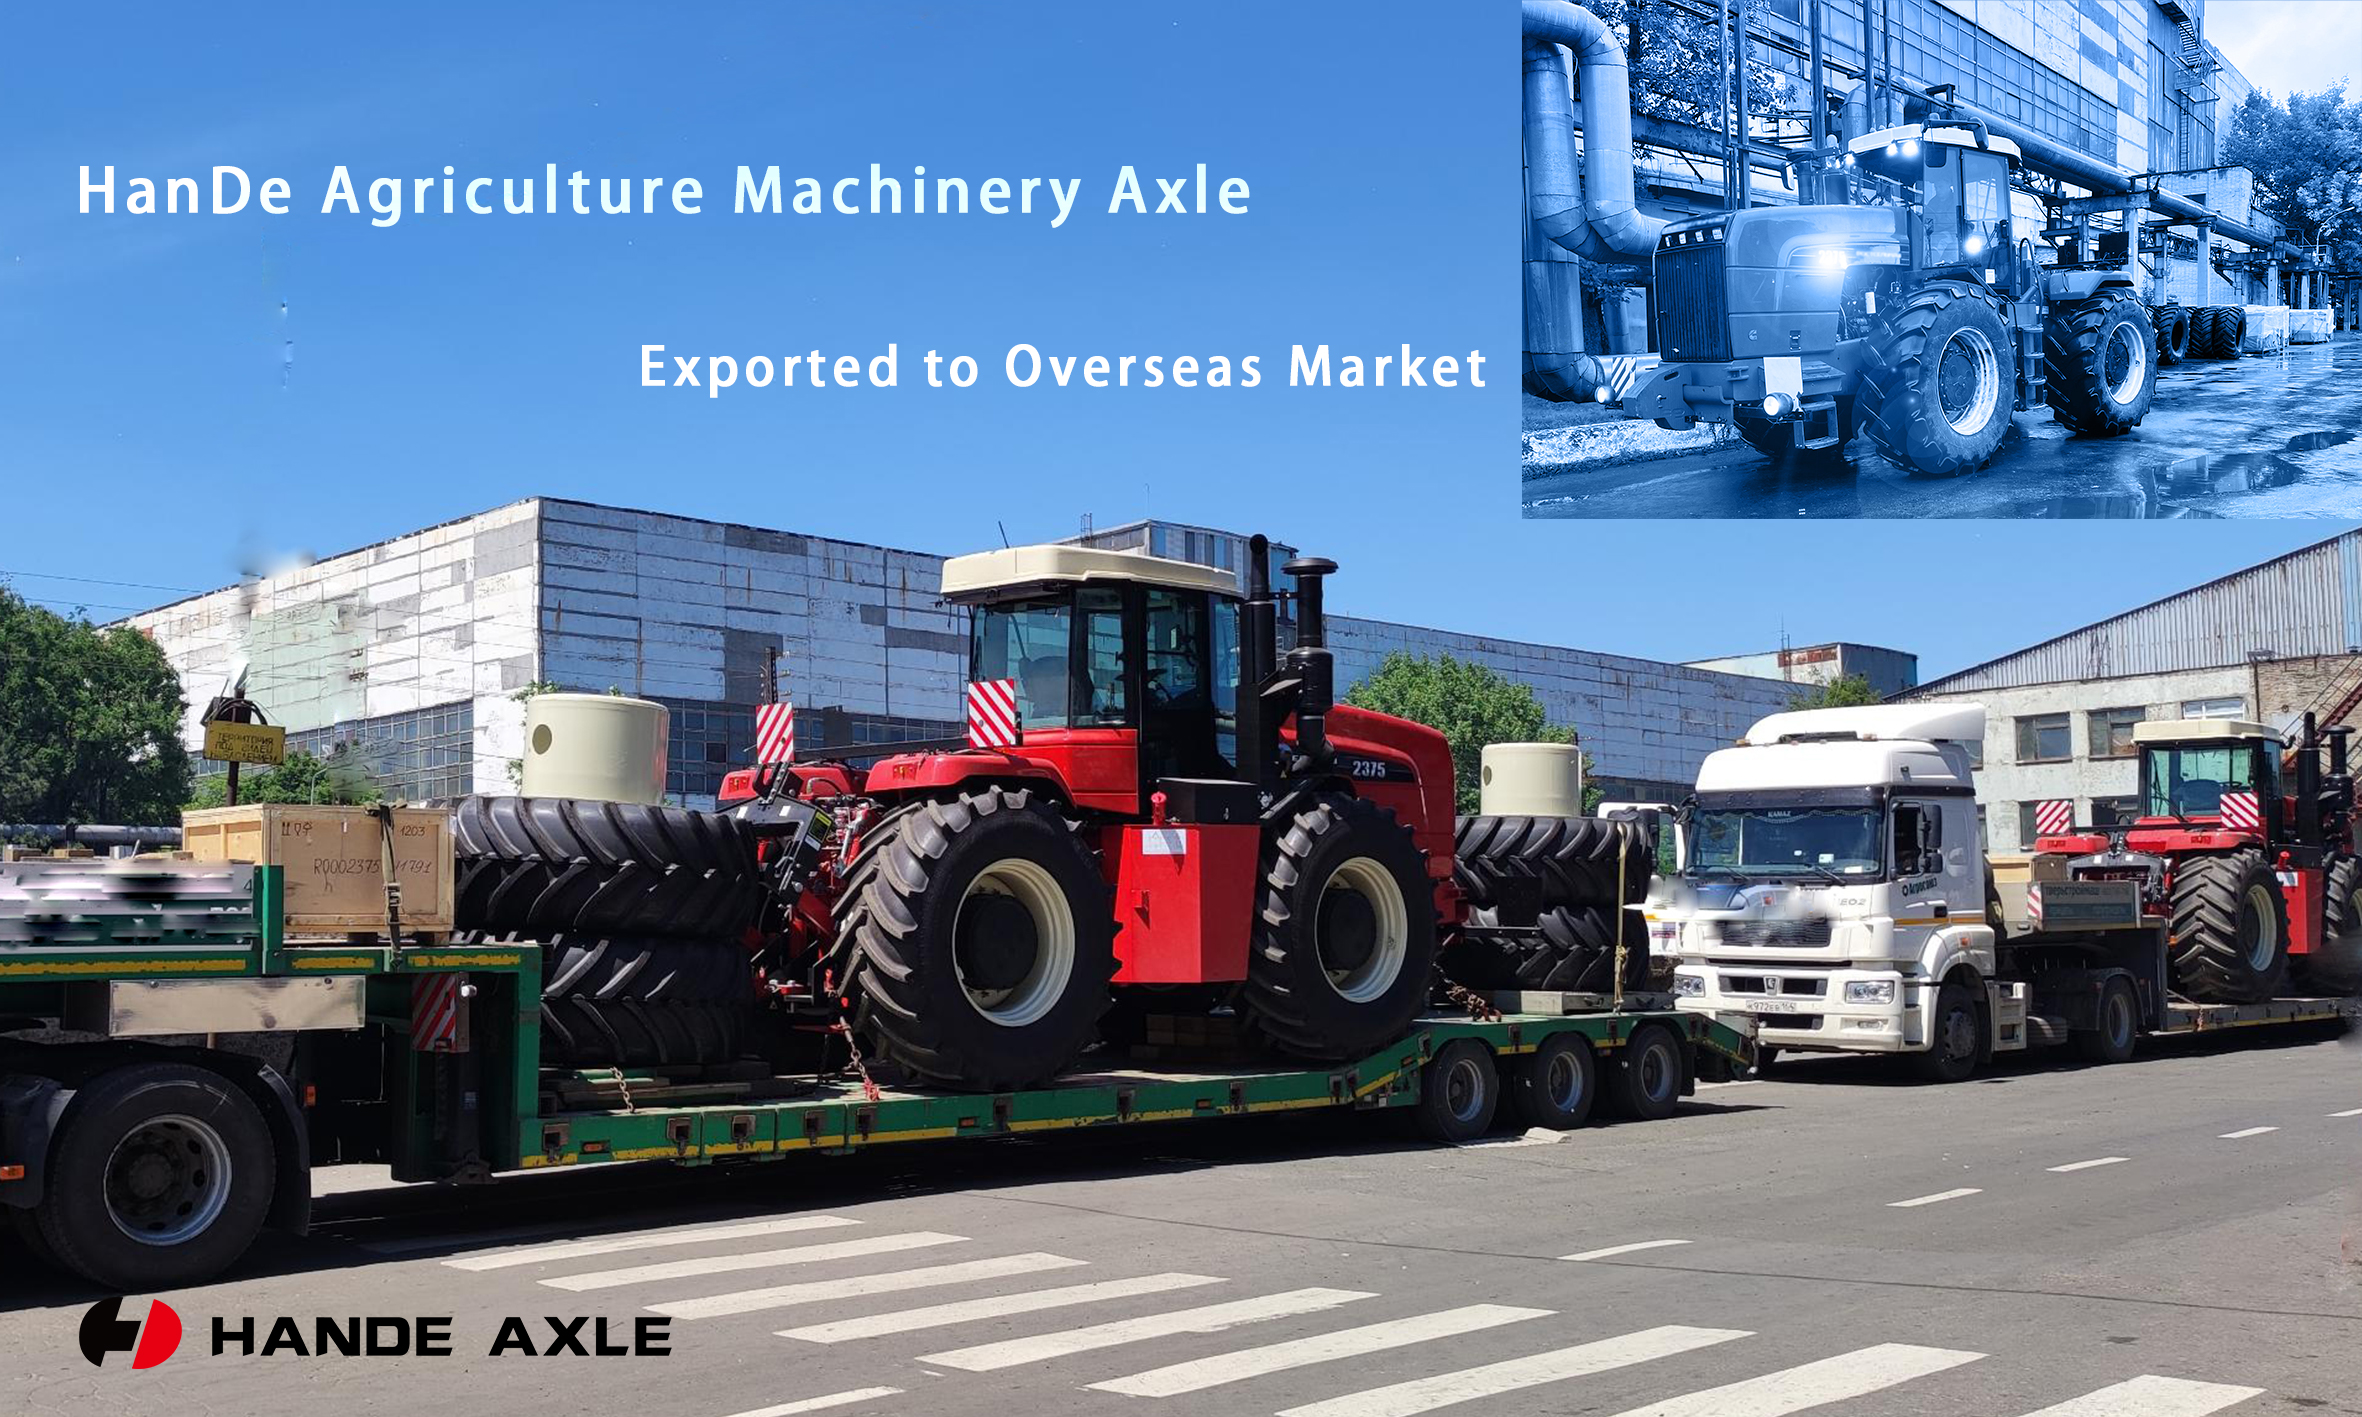 HanDe Agriculture Machinery Axle entered into overseas market officially